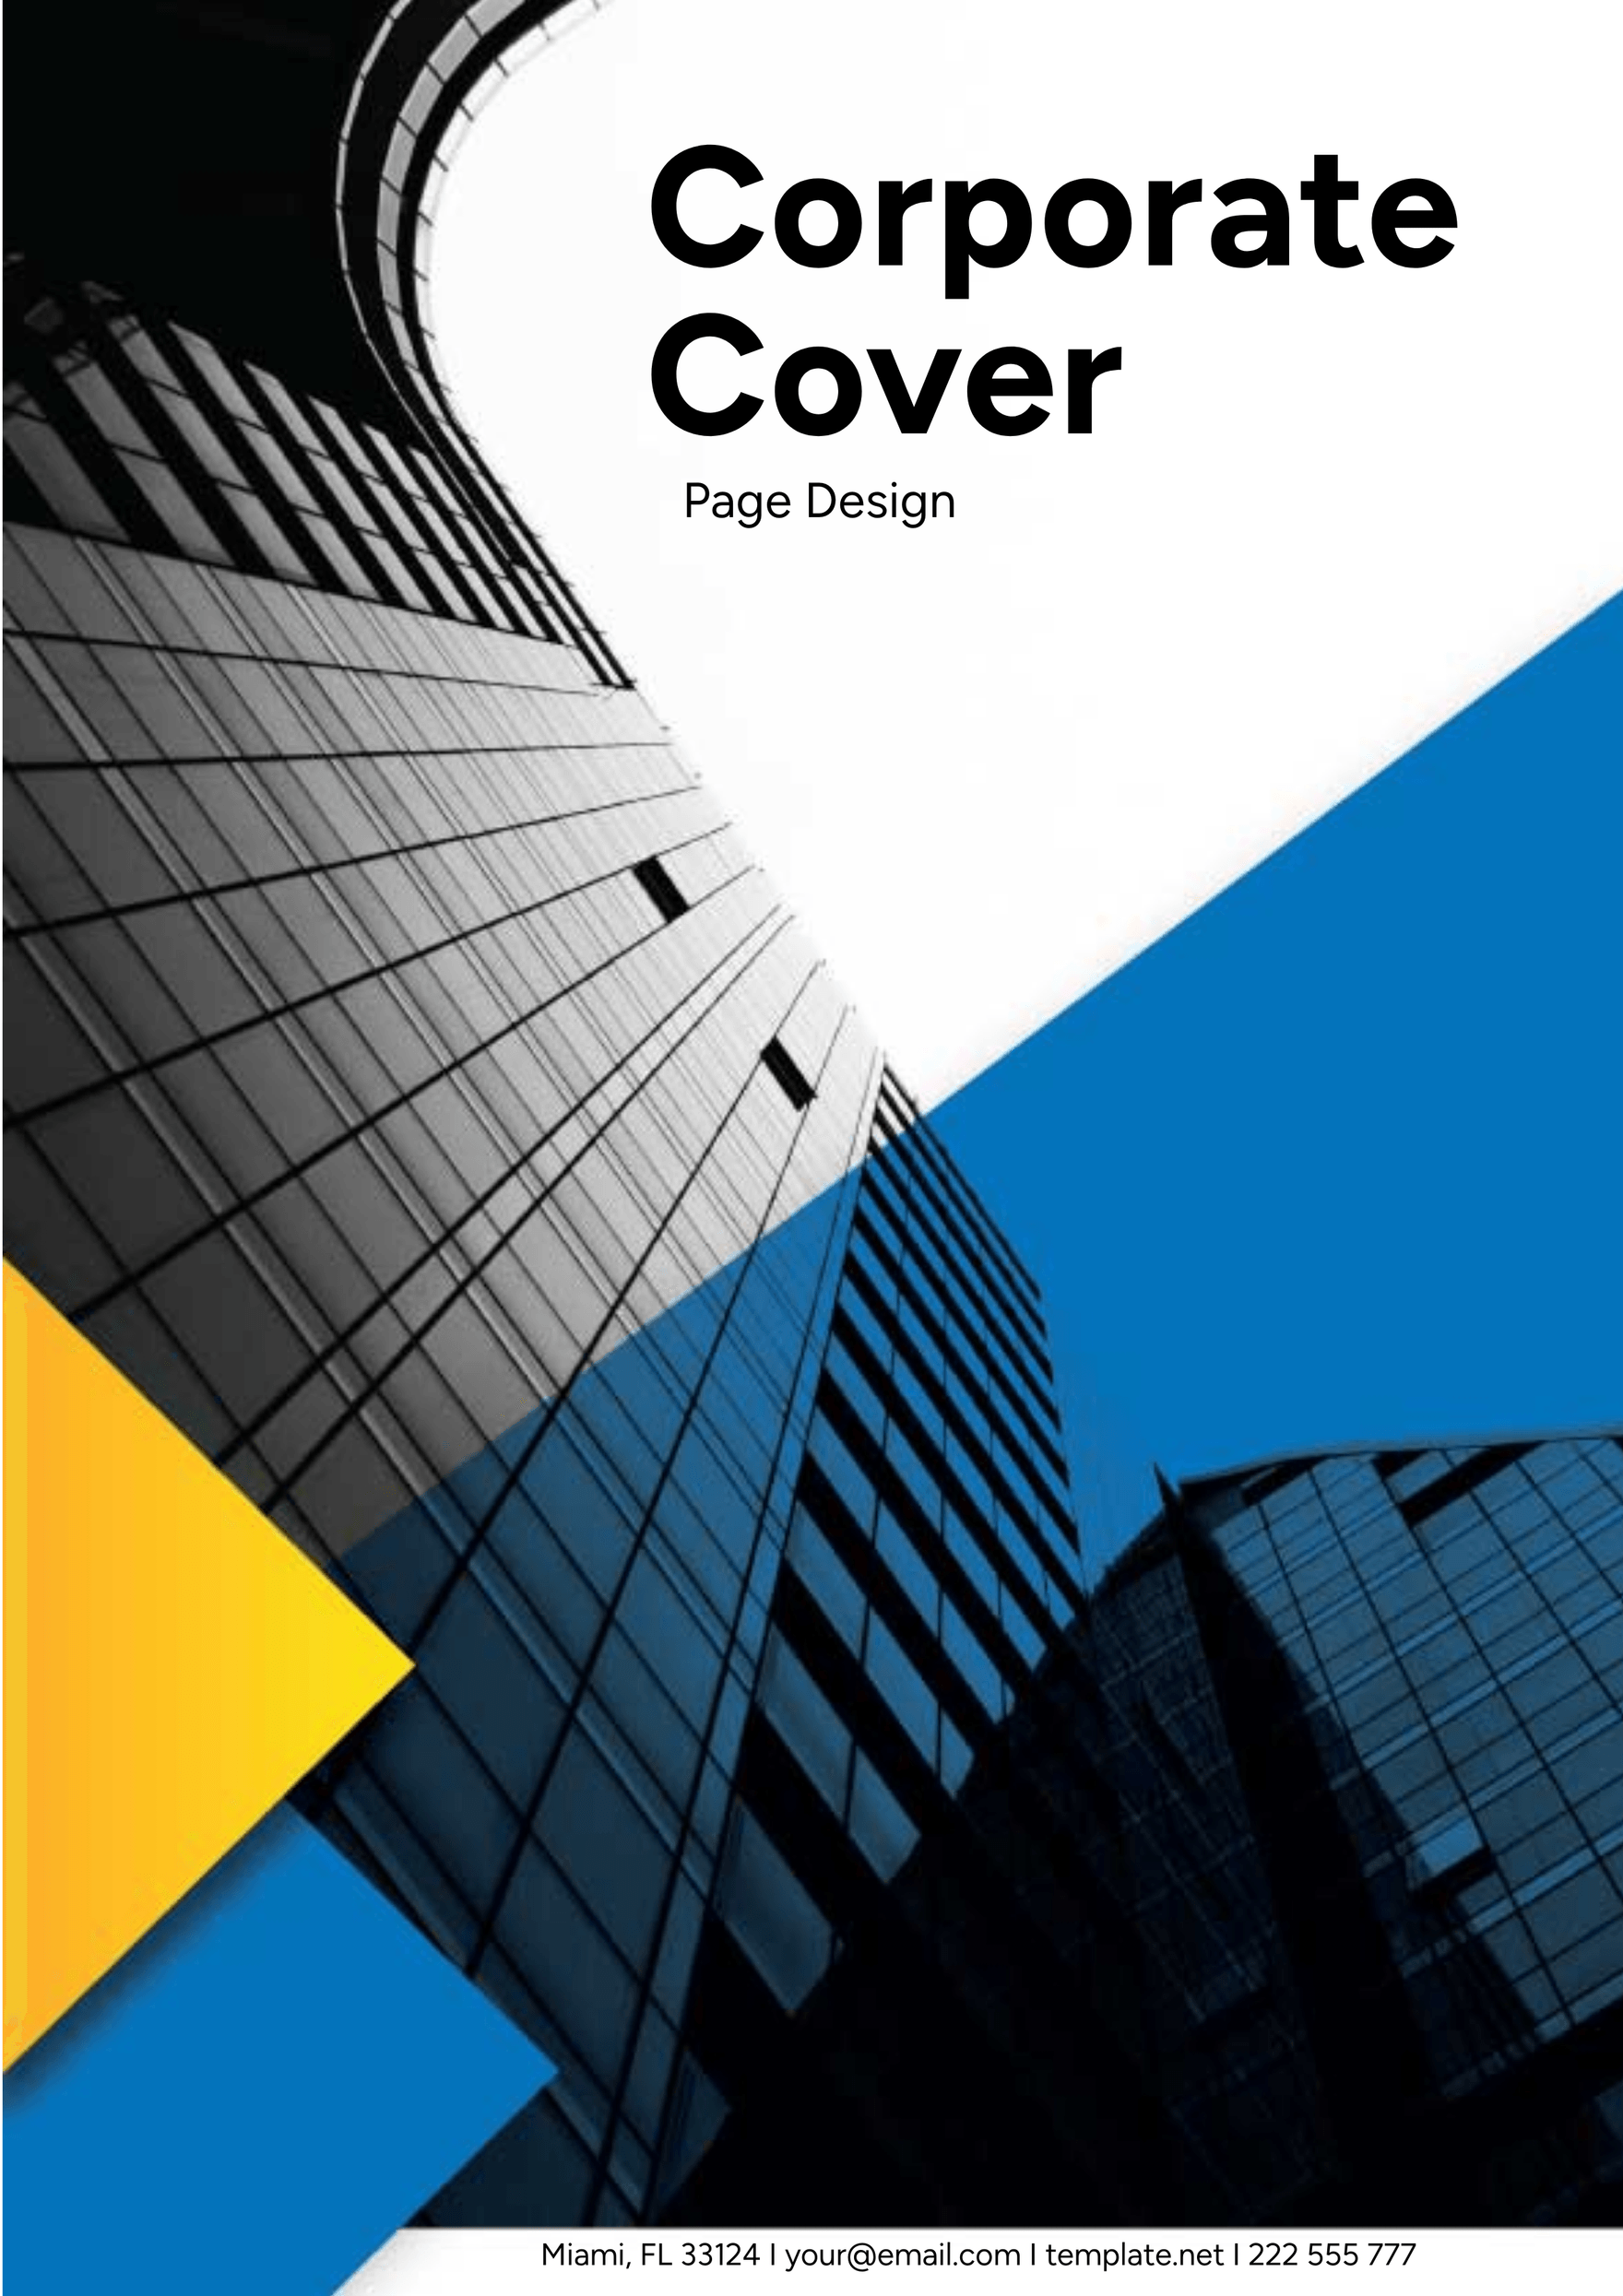 Free Corporate Cover Page Design - Edit Online & Download | Template.net